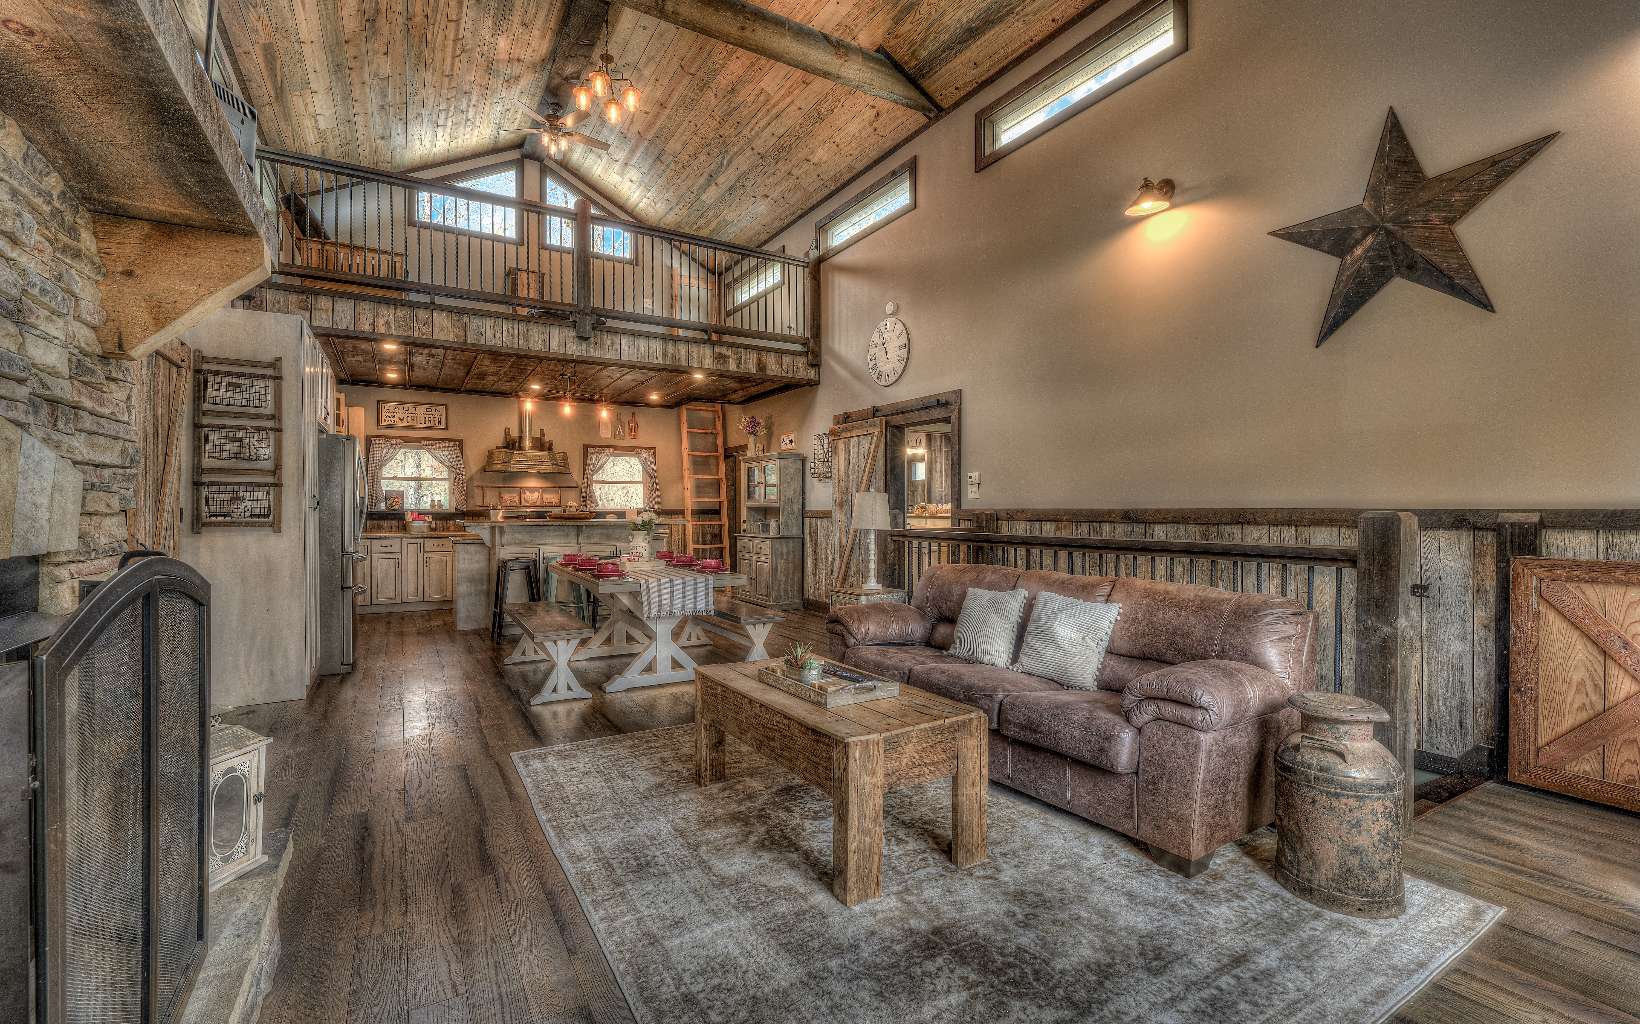 Welcome to The Farmhouse! If you are looking for a turnkey place to stretch out, look no further. Perfect for someone looking to live the mountain life or for the savvy investor. Nestled in the back of a private 3+ acre lot. Located conveniently between Blue Ridge and Blairsville. Massive vaulted great room is sure to impress anyone. Game/living room downstairs will keep guests entertained for hours. Did I mention there is a brand-new movie room? This house has it all. Over 3300 sq ft of living space. Hot tub. Screened in patio. Bonus loft above the kitchen. Master on main. 3 full bathrooms. Fire pit. And it's professionally decorated.